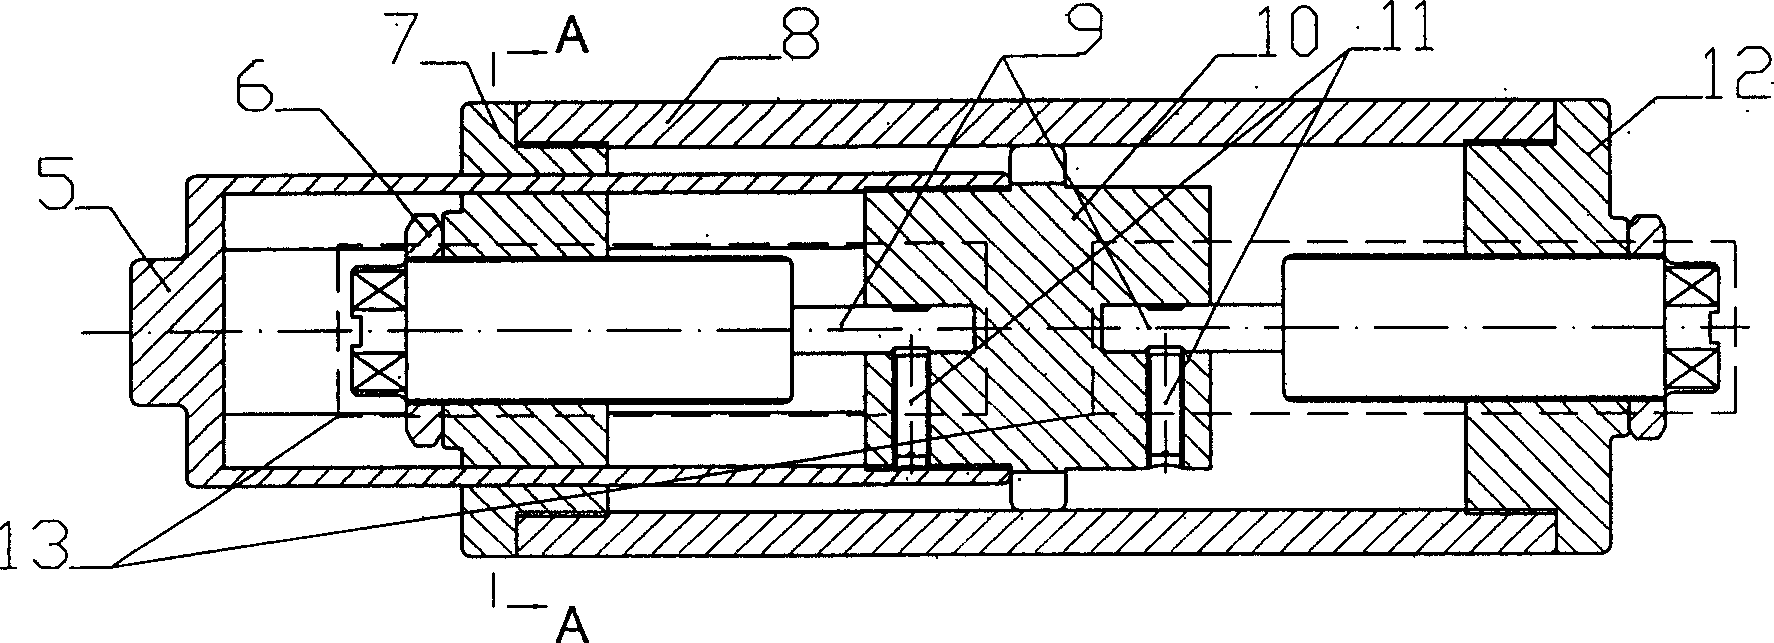 Hydraulic buffer of complex vibration with mechanism in six degree of freedom based on parallel connection